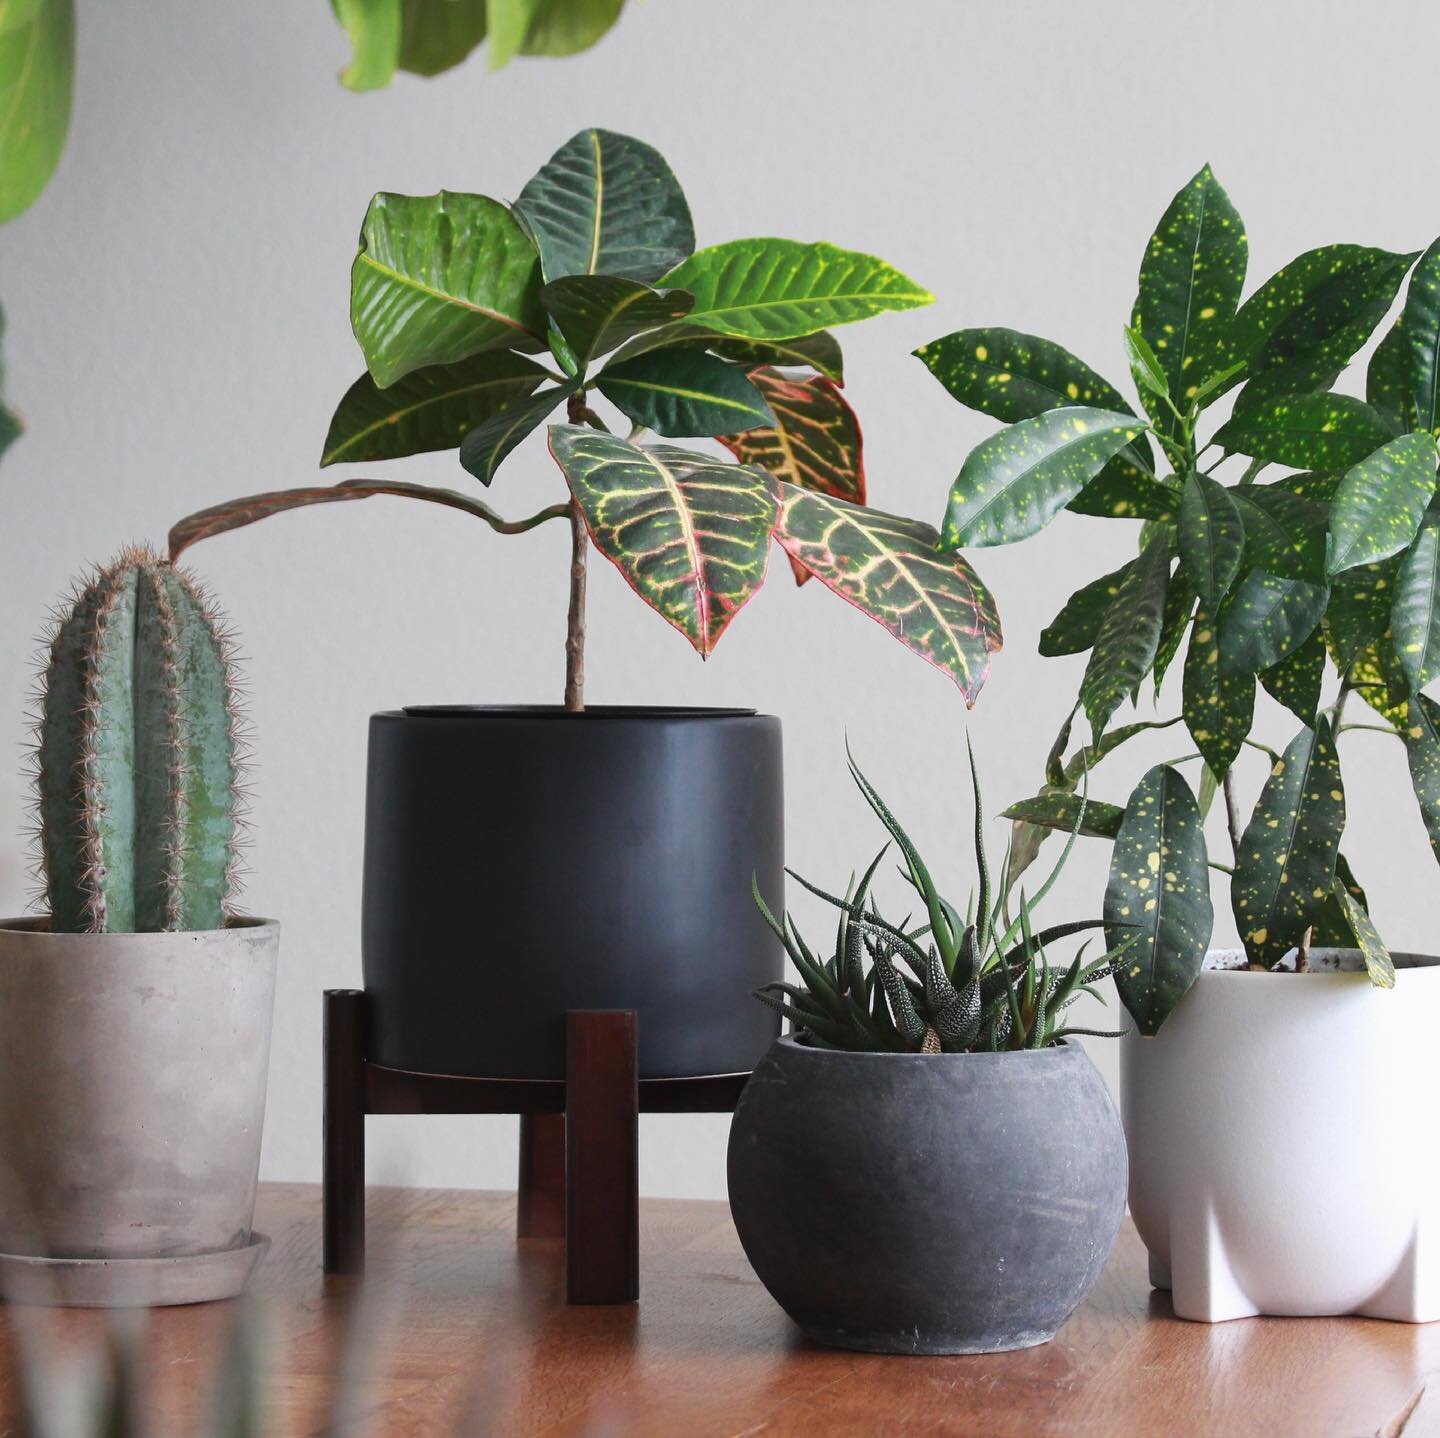 ::GIVEAWAY ENDED:: @_carey_sue_  is the lucky winner of The Sonder Planter and @lillie_s_talley is the winner of the Classic Corner 45 Planter!
Email us to claim your prize! 👏🏼
.
🌱🌵🪴 Thank you so much to everyone who entered this giveaway! 
.
We